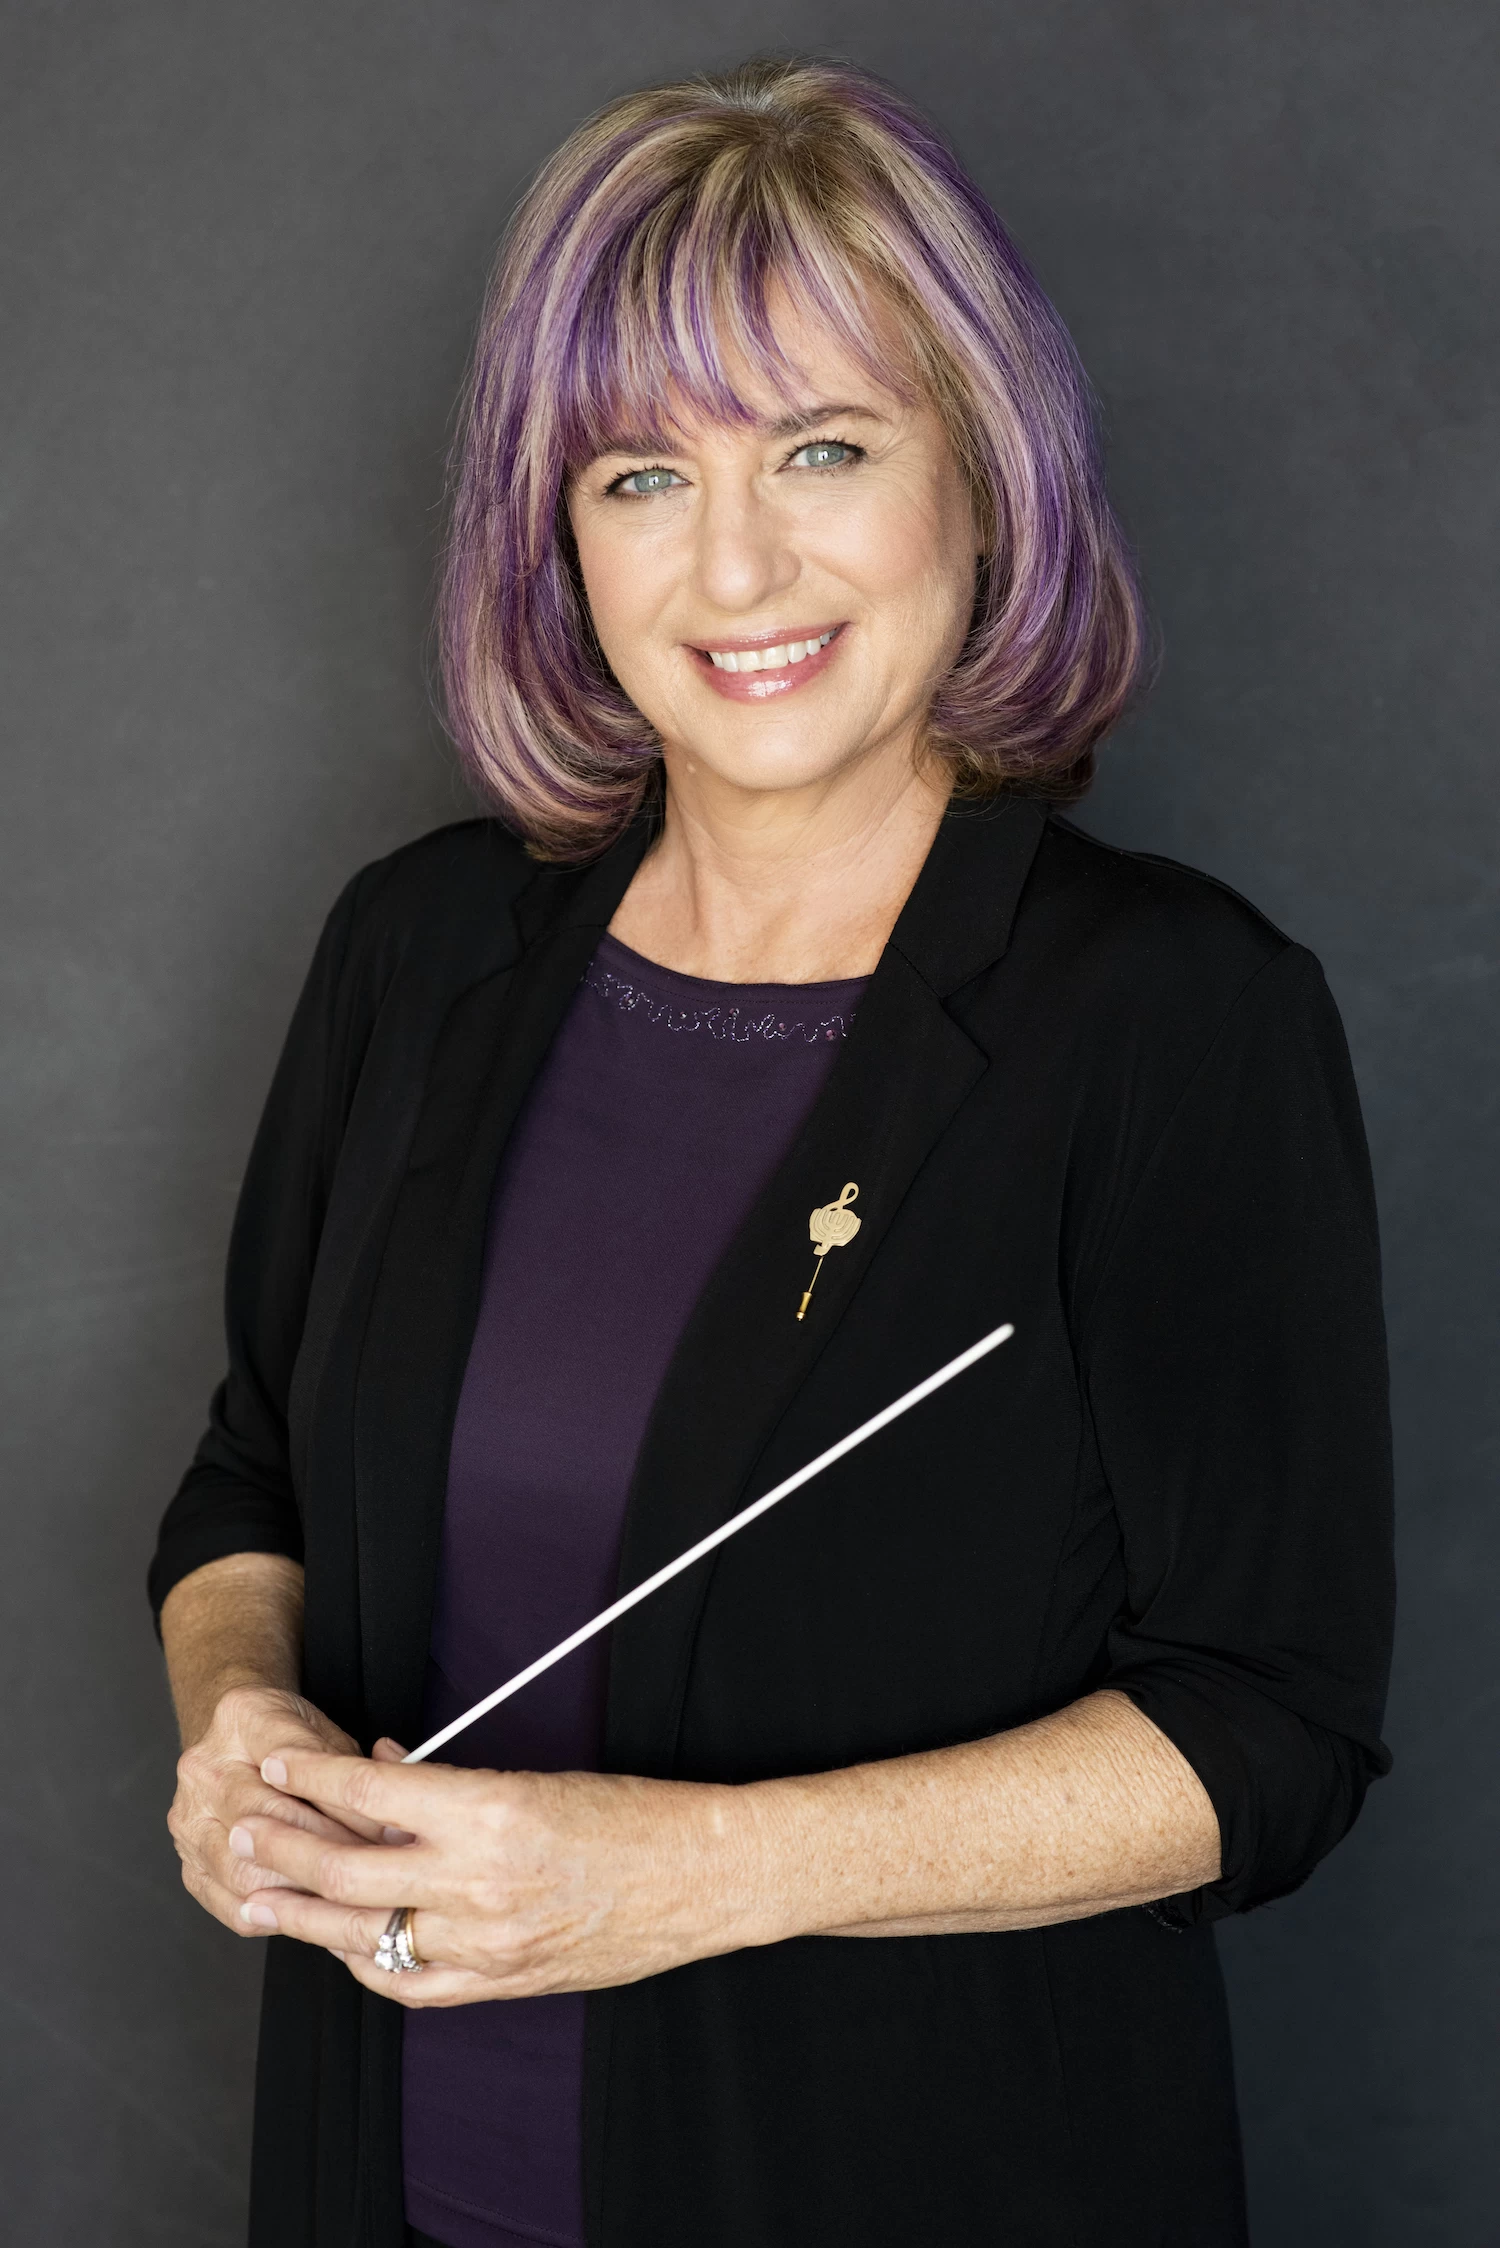 Noreen Green, conductor. Photo courtesy of the artist.